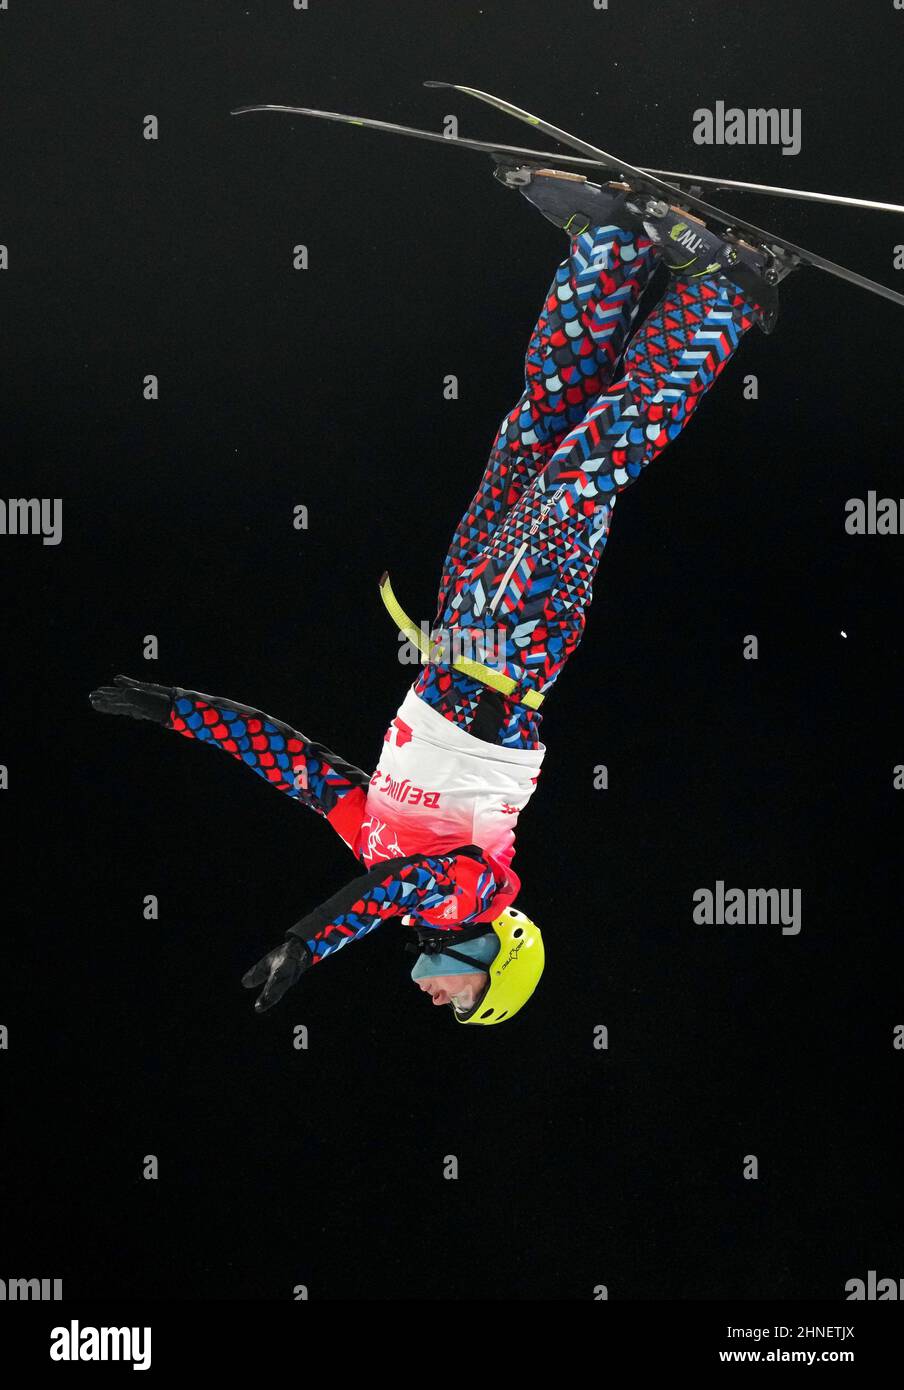 Zhangjiakou, China's Hebei Province. 16th Feb, 2022. Ilia Burov of ROC competes during the freestyle skiing men's aerials final of Beijing 2022 Winter Olympics at Genting Snow Park in Zhangjiakou, north China's Hebei Province, Feb. 16, 2022. Credit: Wang Haofei/Xinhua/Alamy Live News Stock Photo